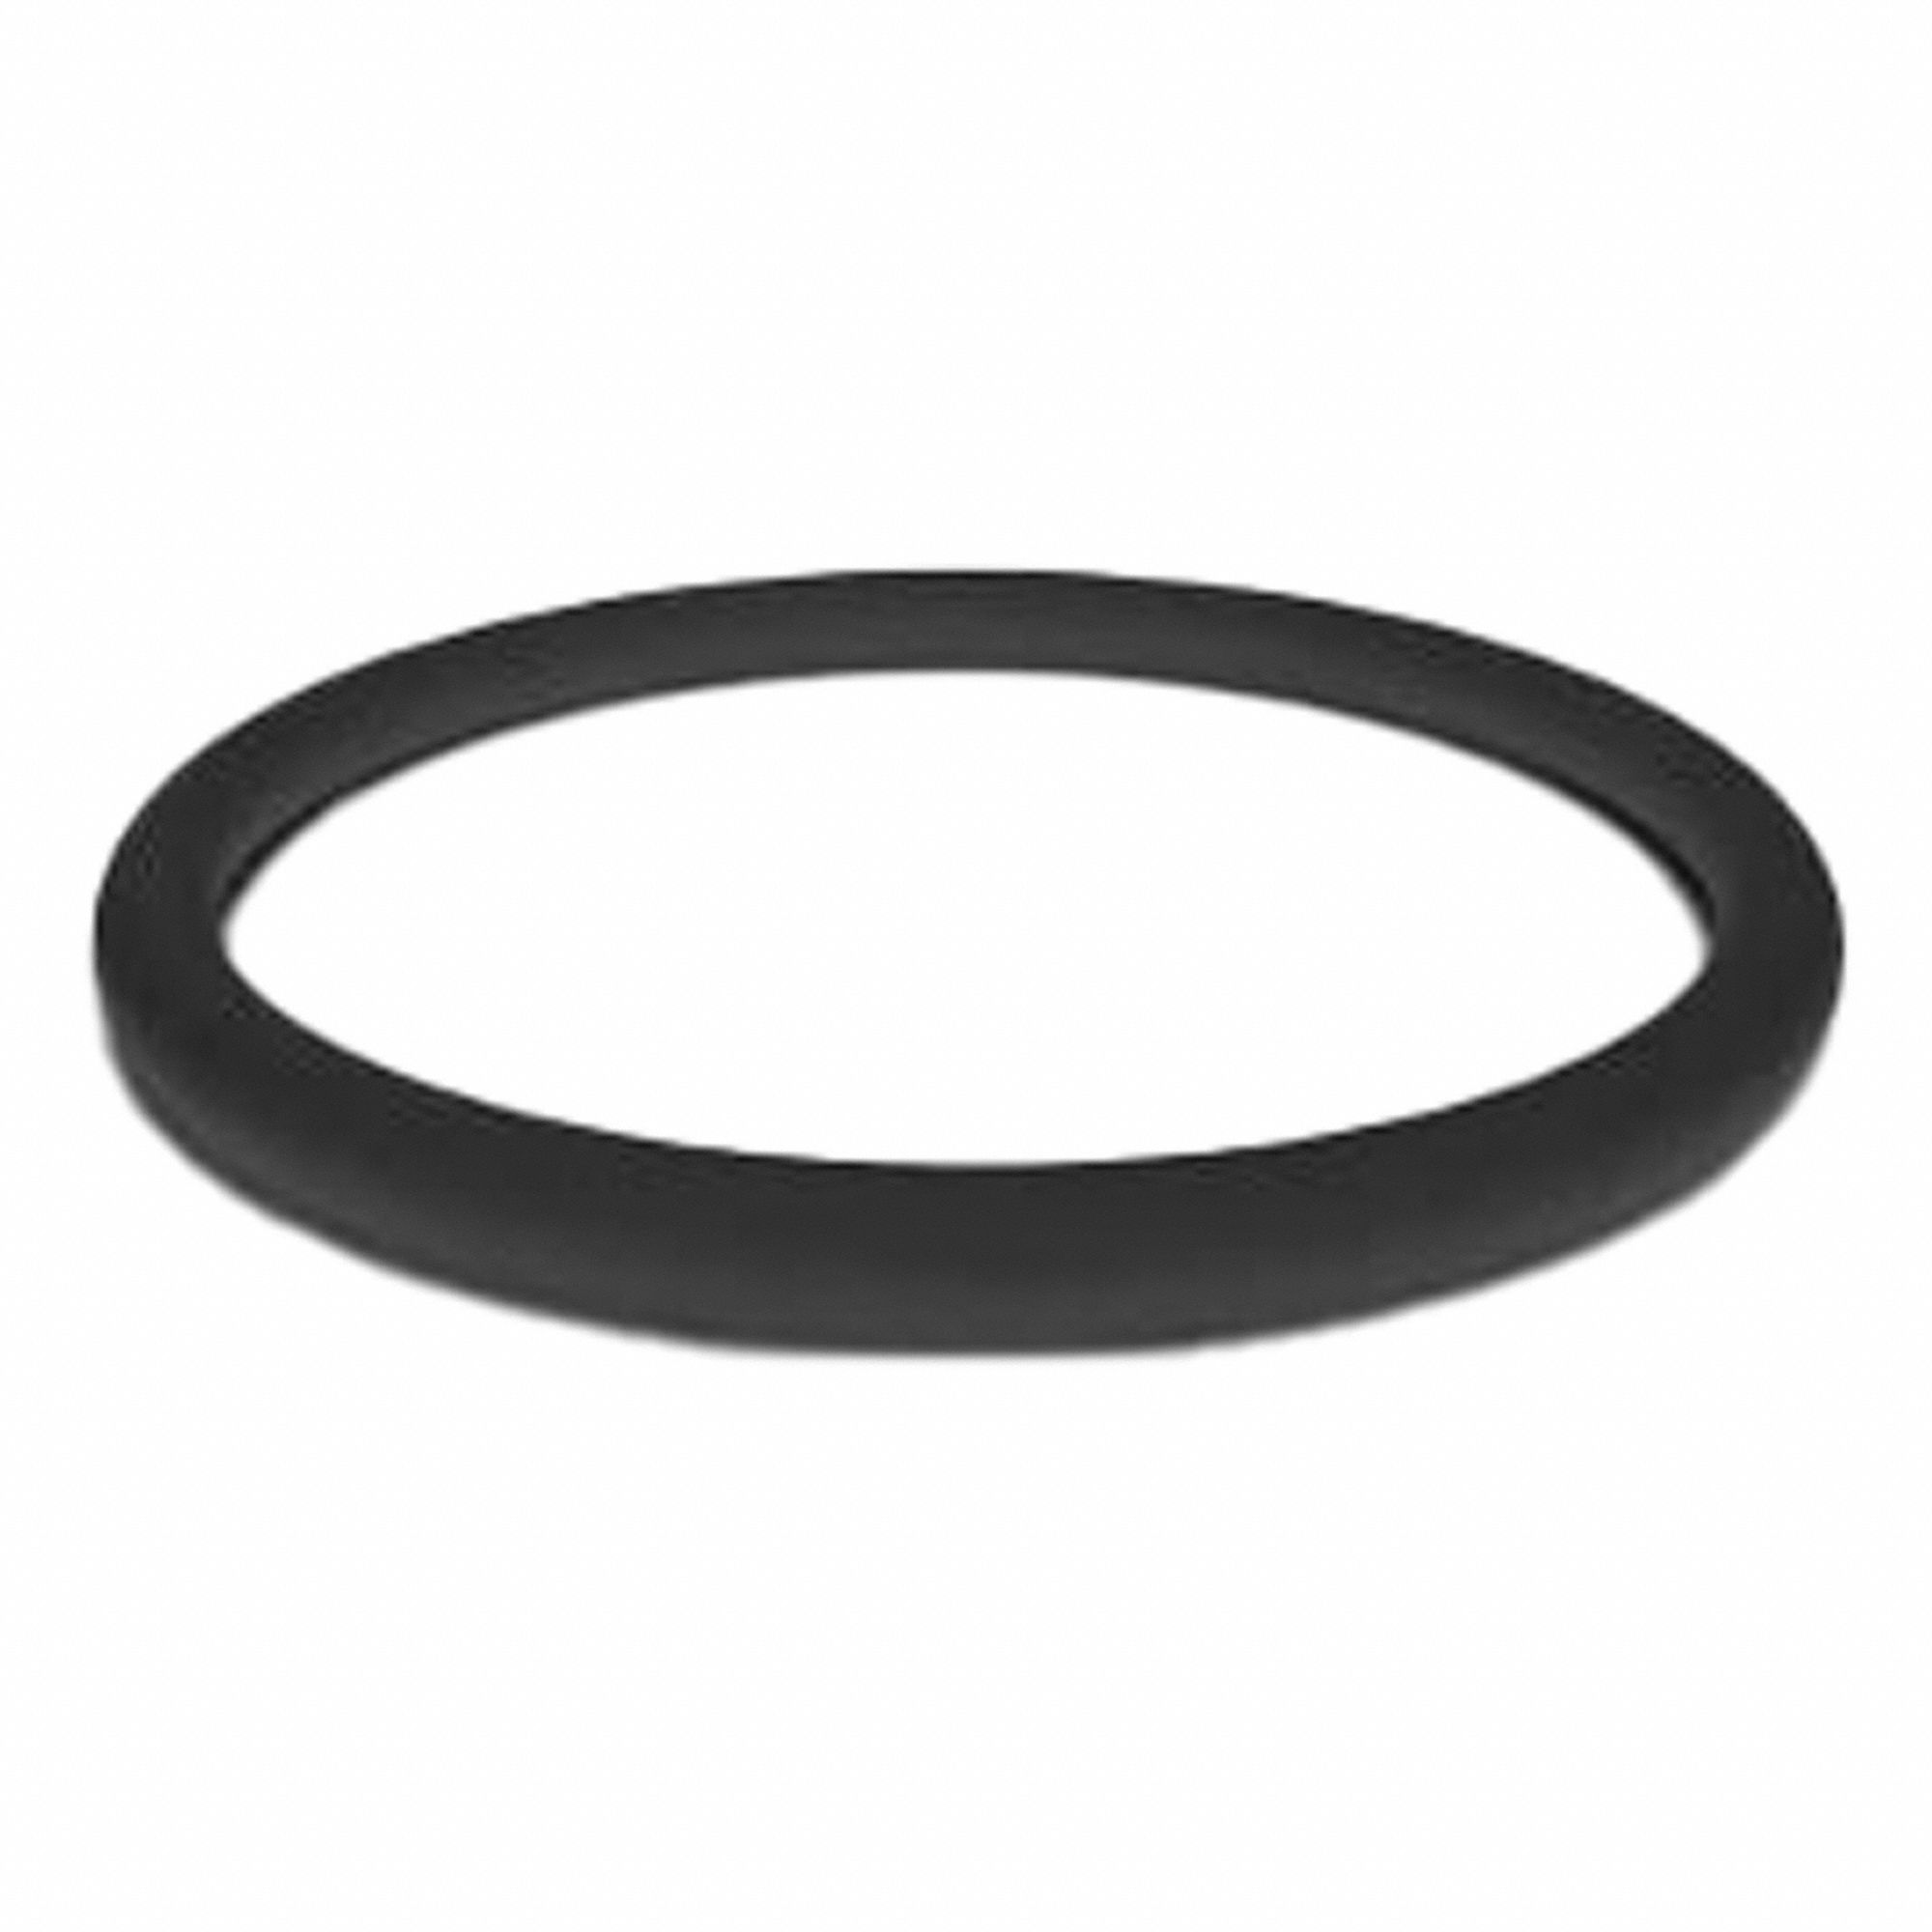 O-RING, 90 DUROMETER, -40 ° F TO 240 ° F, 0.064 IN THICK, 0.301 IN INSIDE DIA, BUNA-N